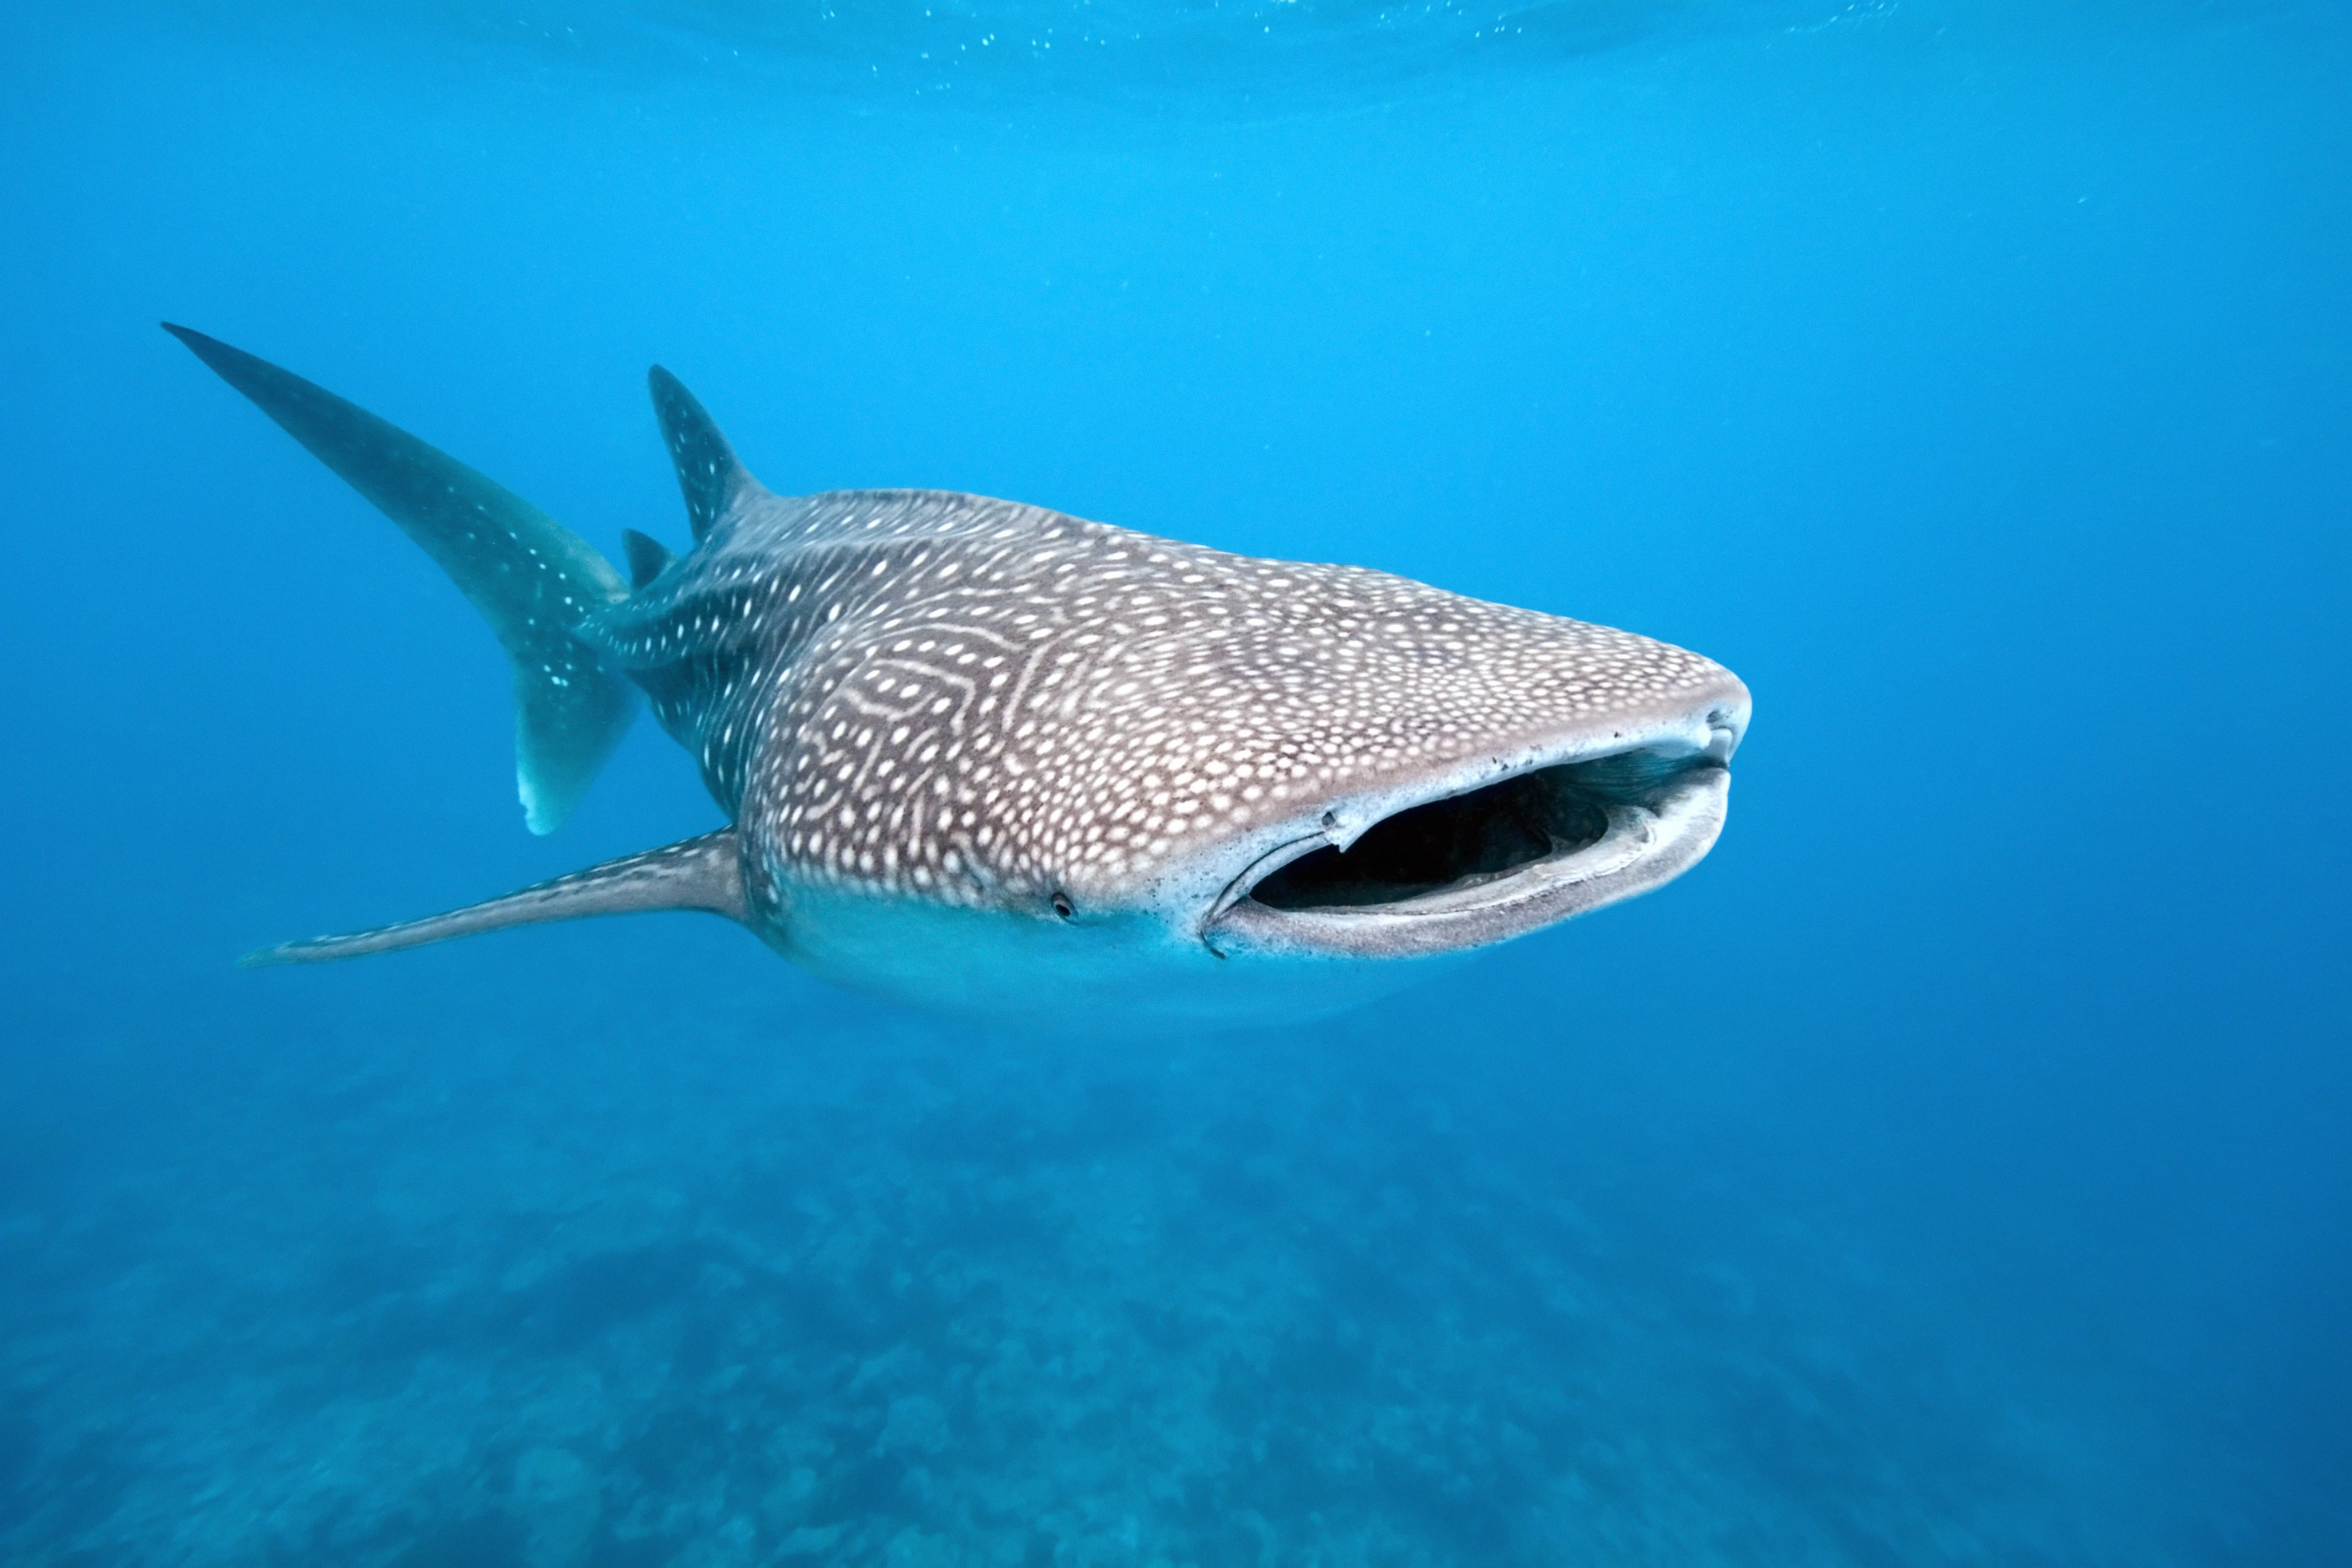 While their size is imposing, whale sharks are gentle giants